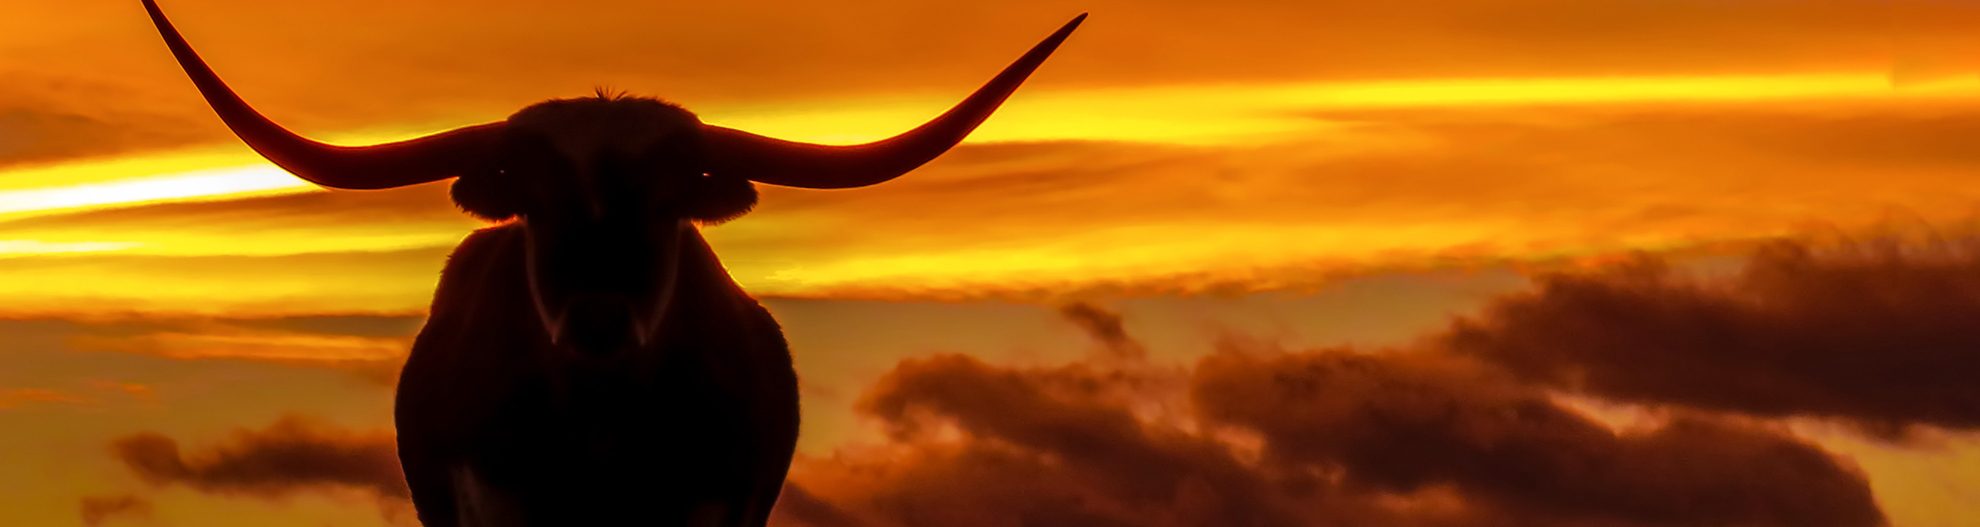 cow at sunset